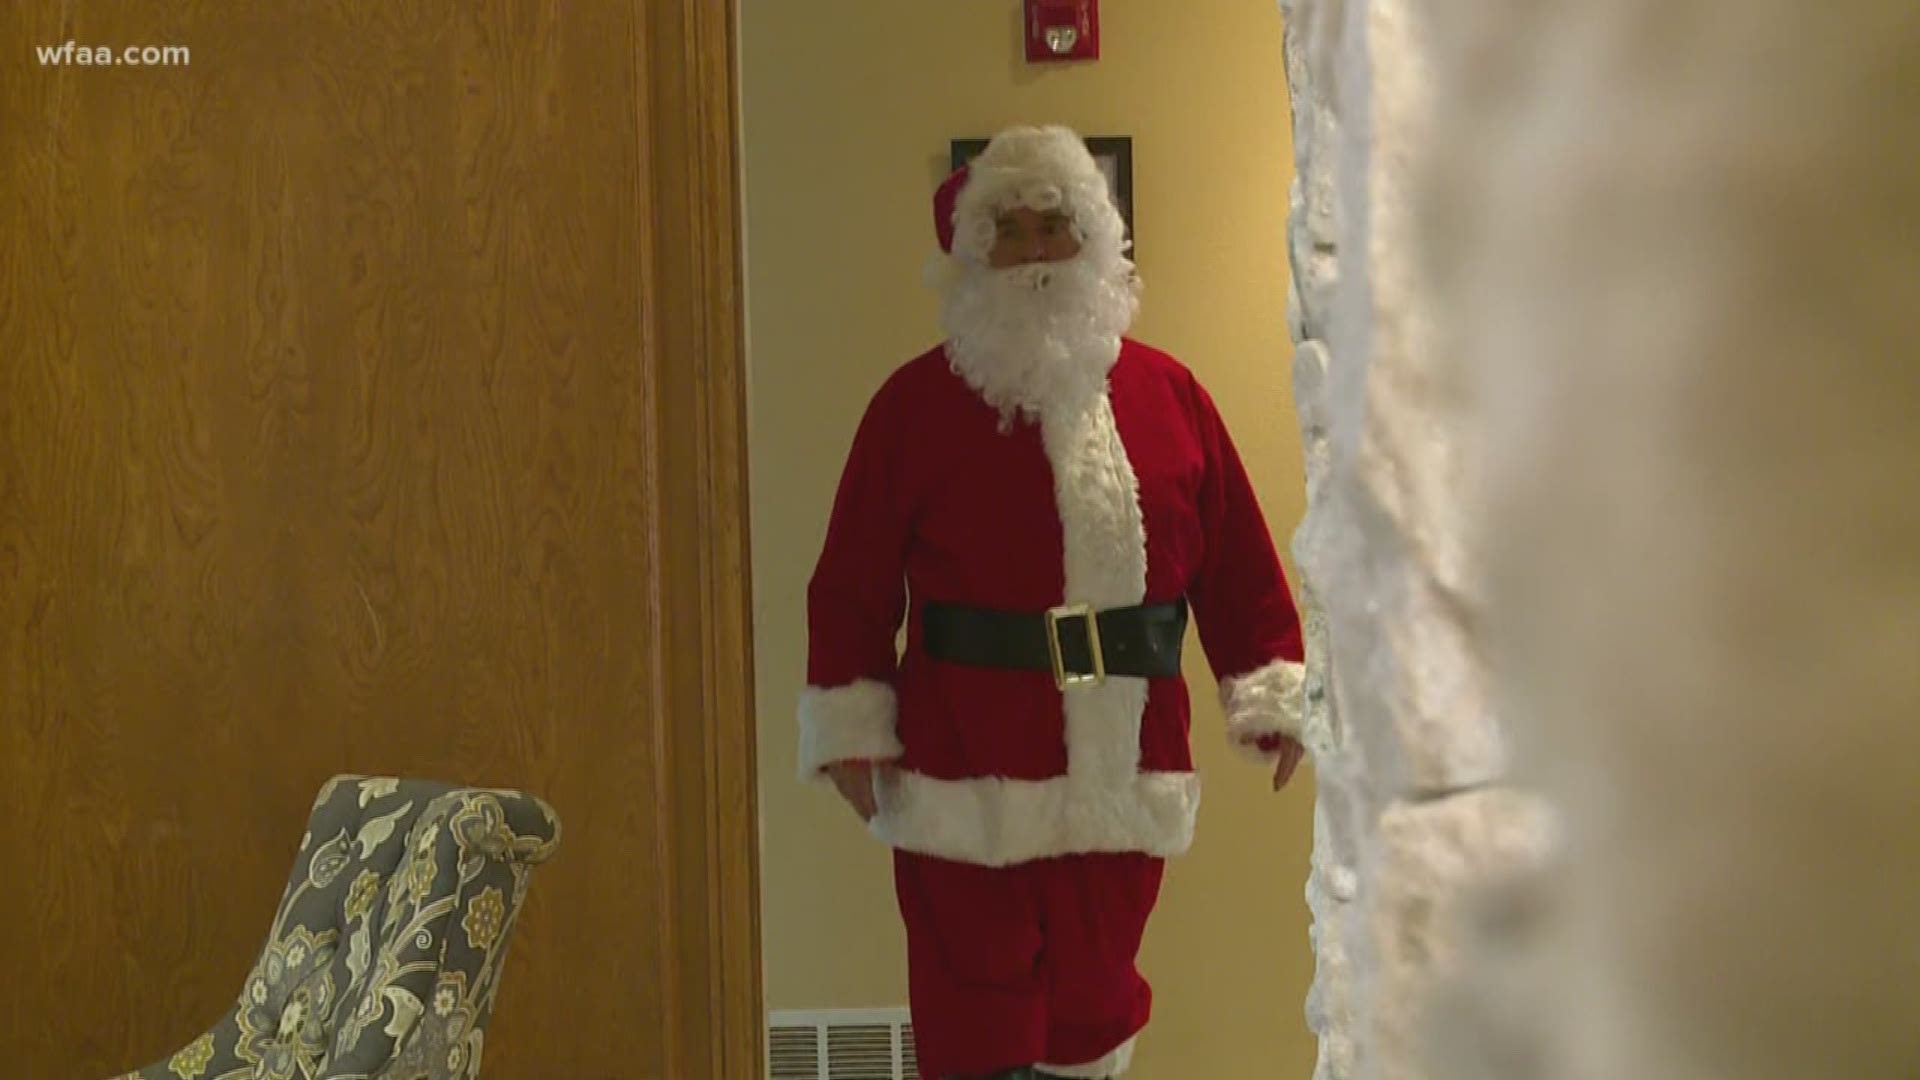 Dallas woman on a mission to give seniors a Christmas (in July) surprise